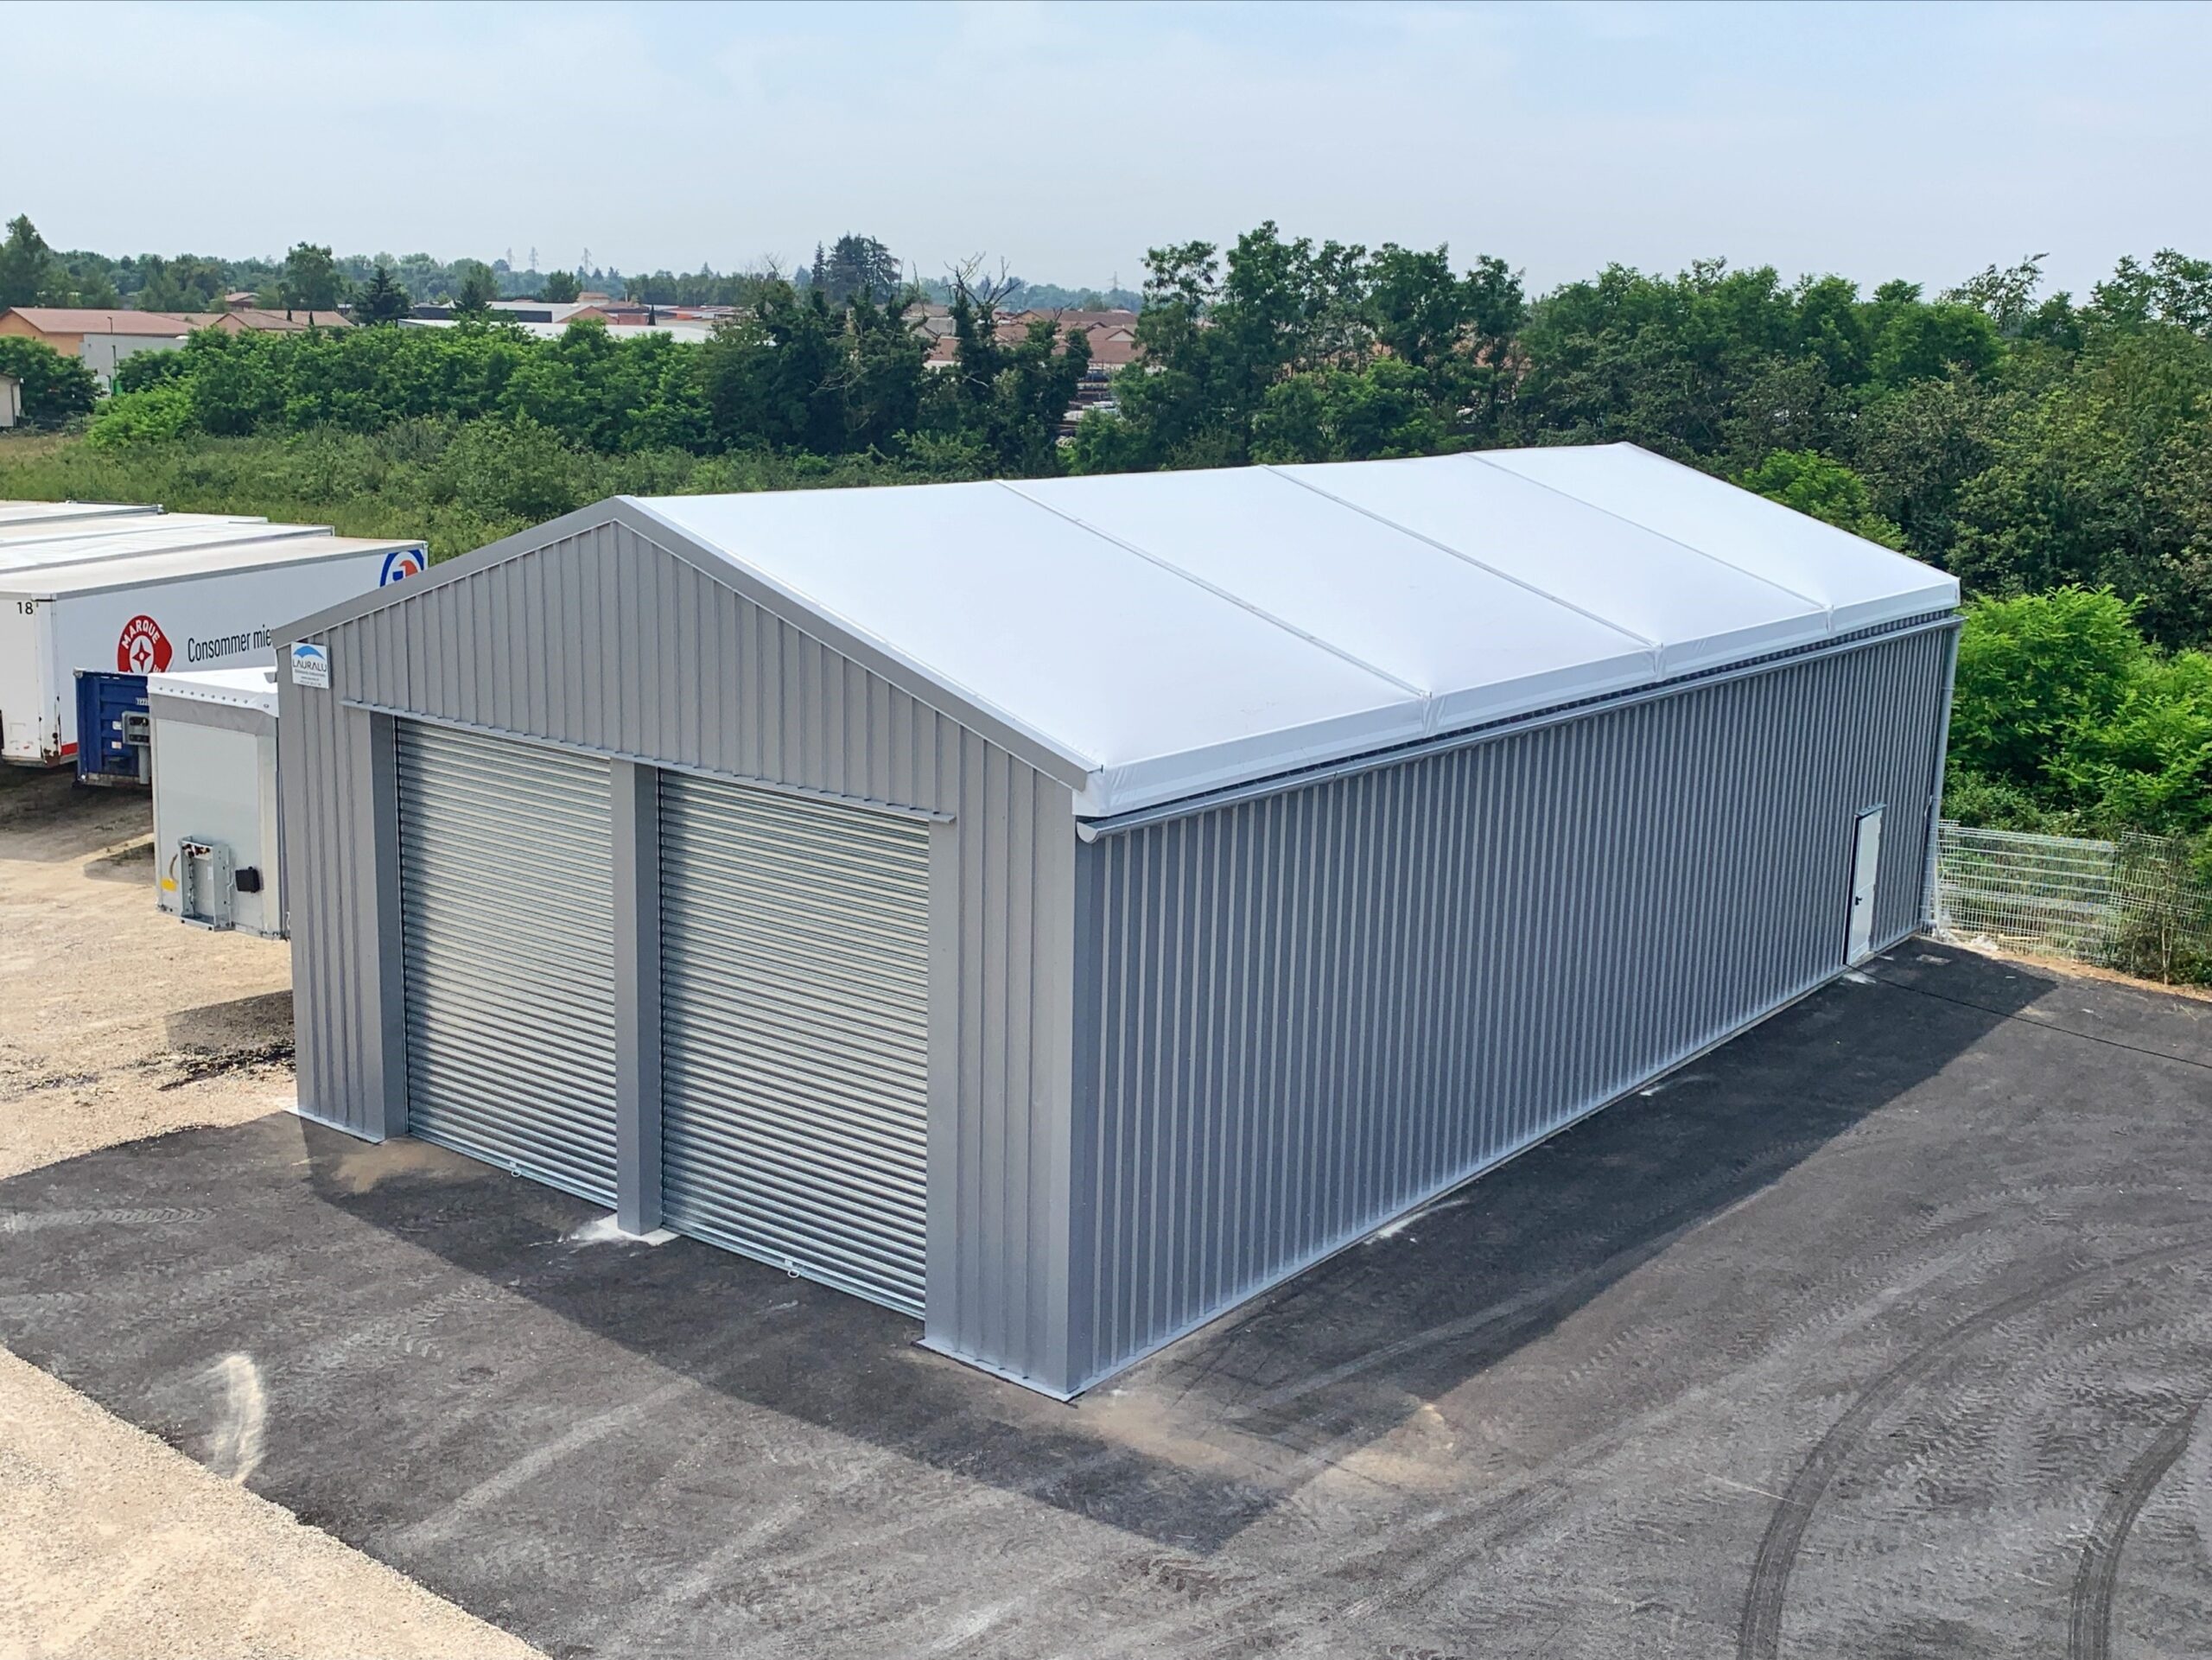 Seven Benefits of Temporary Buildings